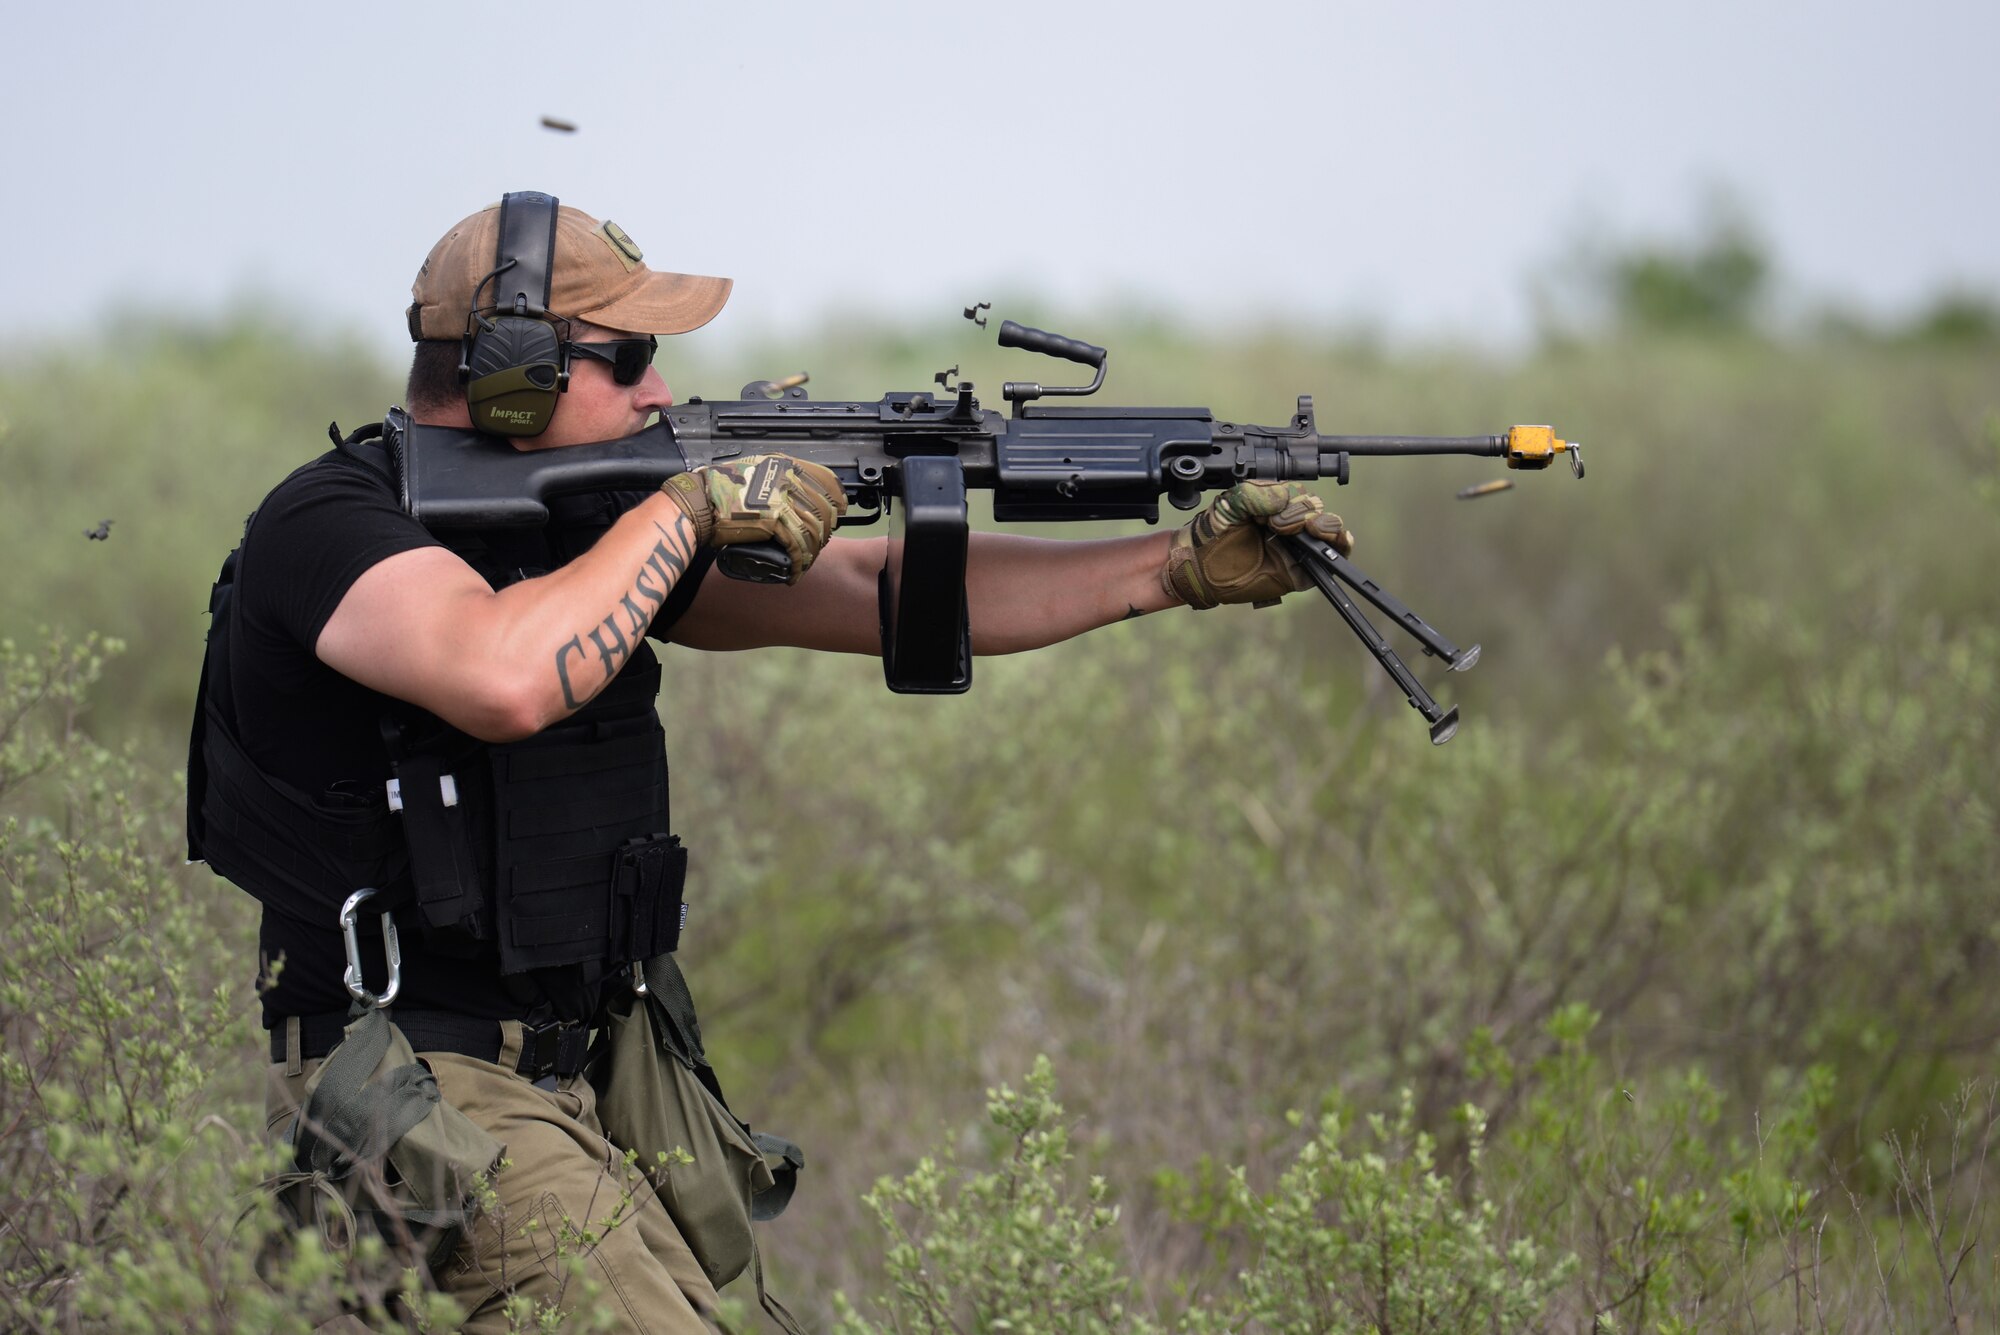 Johannes Thiel, 47th Security Forces Squadron patrolman, lays down suppressive fire as his team advances on opposing forces during an exercise at Laughlin Air Force Base, Texas, April 17, 2019. Thiel, a former U.S. Marine, brings his combat experience to Laughlin and got a chance to challenge his tactics, teamwork and physical fitness as he and his team were put head to head with a simulated opposing force, consisting of many coworkers he works with daily. (U.S. Air Force photo by Senior Airman Benjamin N. Valmoja)